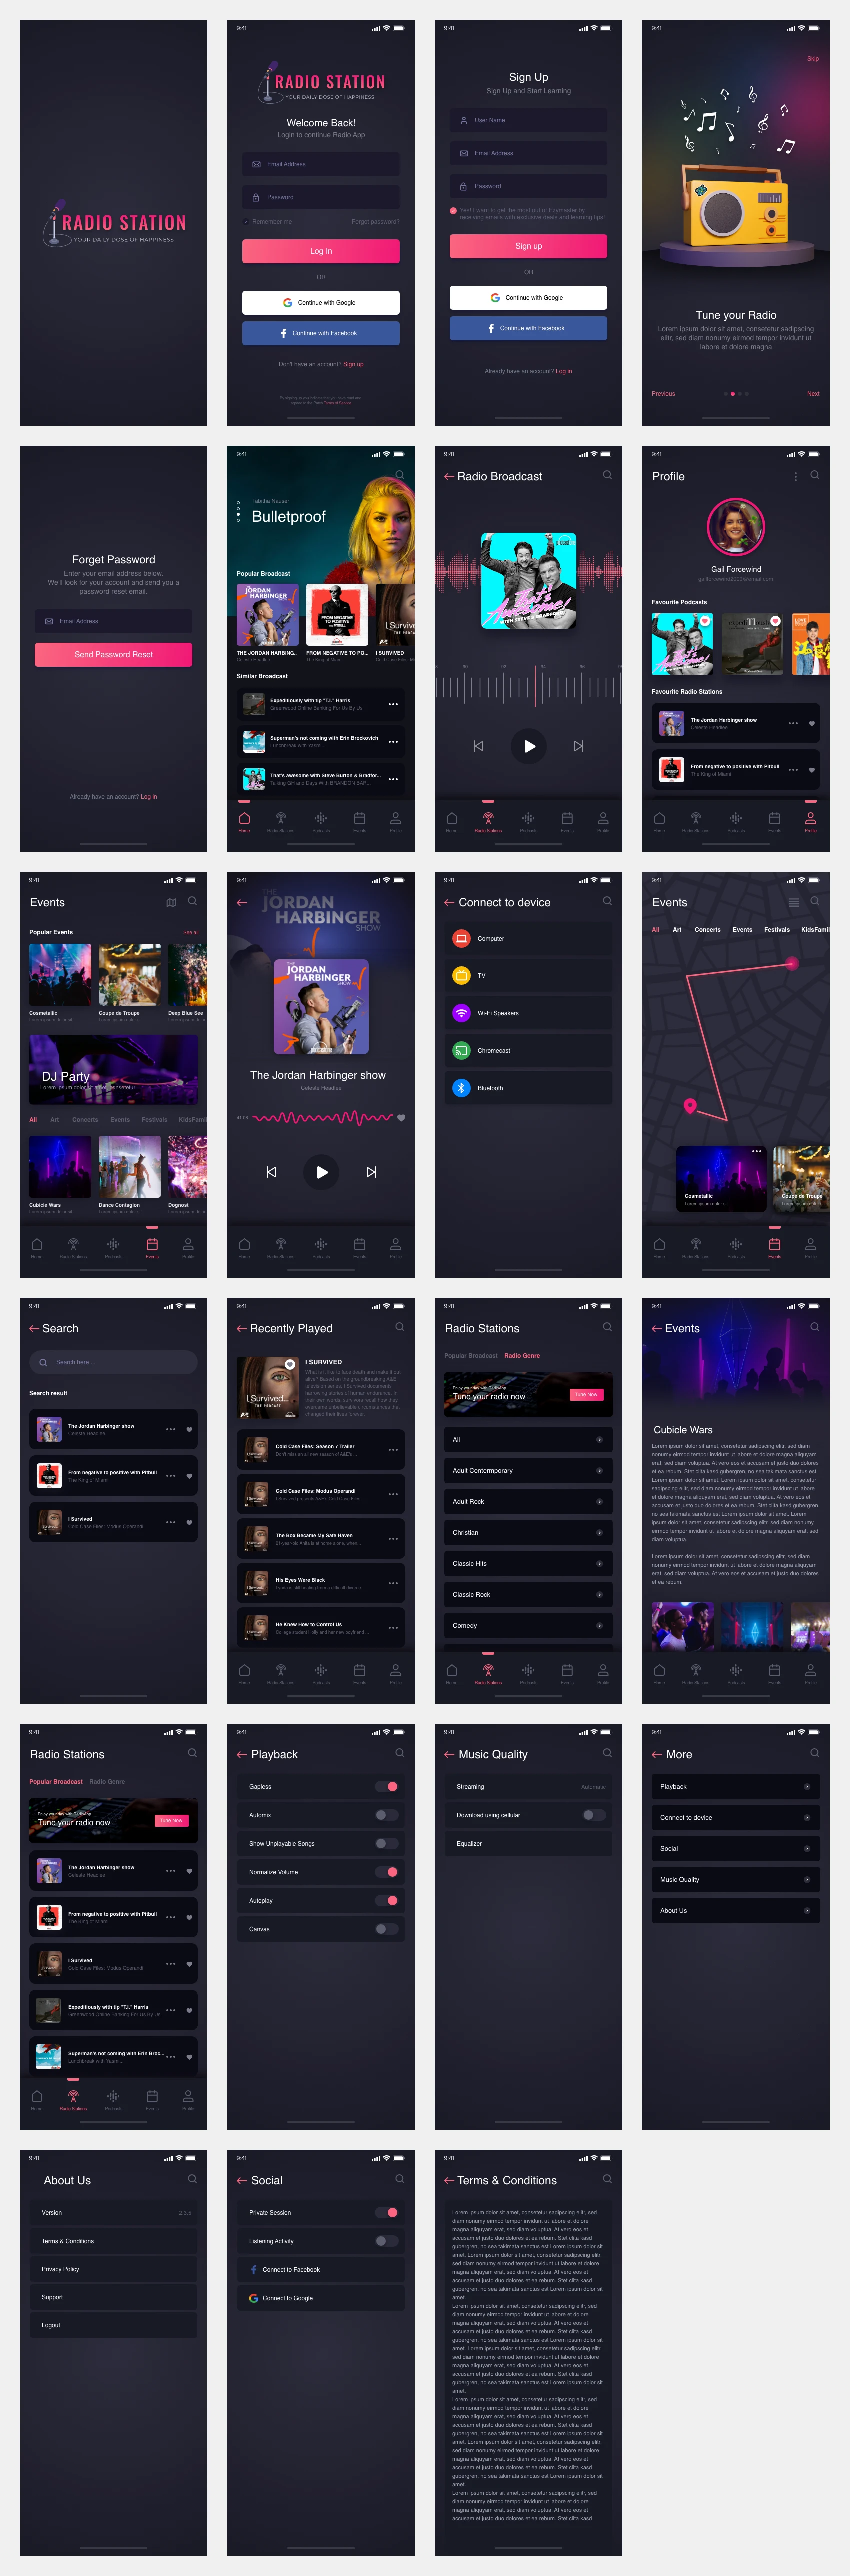 Podcast App Free UI Kit for Adobe XD - The Podcast is a free UI kit consist of 23 radio app screens which can help you to boost your design process. Easy to customize to fit your style. Also, this is a clean & minimal UI kit for mobile with a dark mode style.